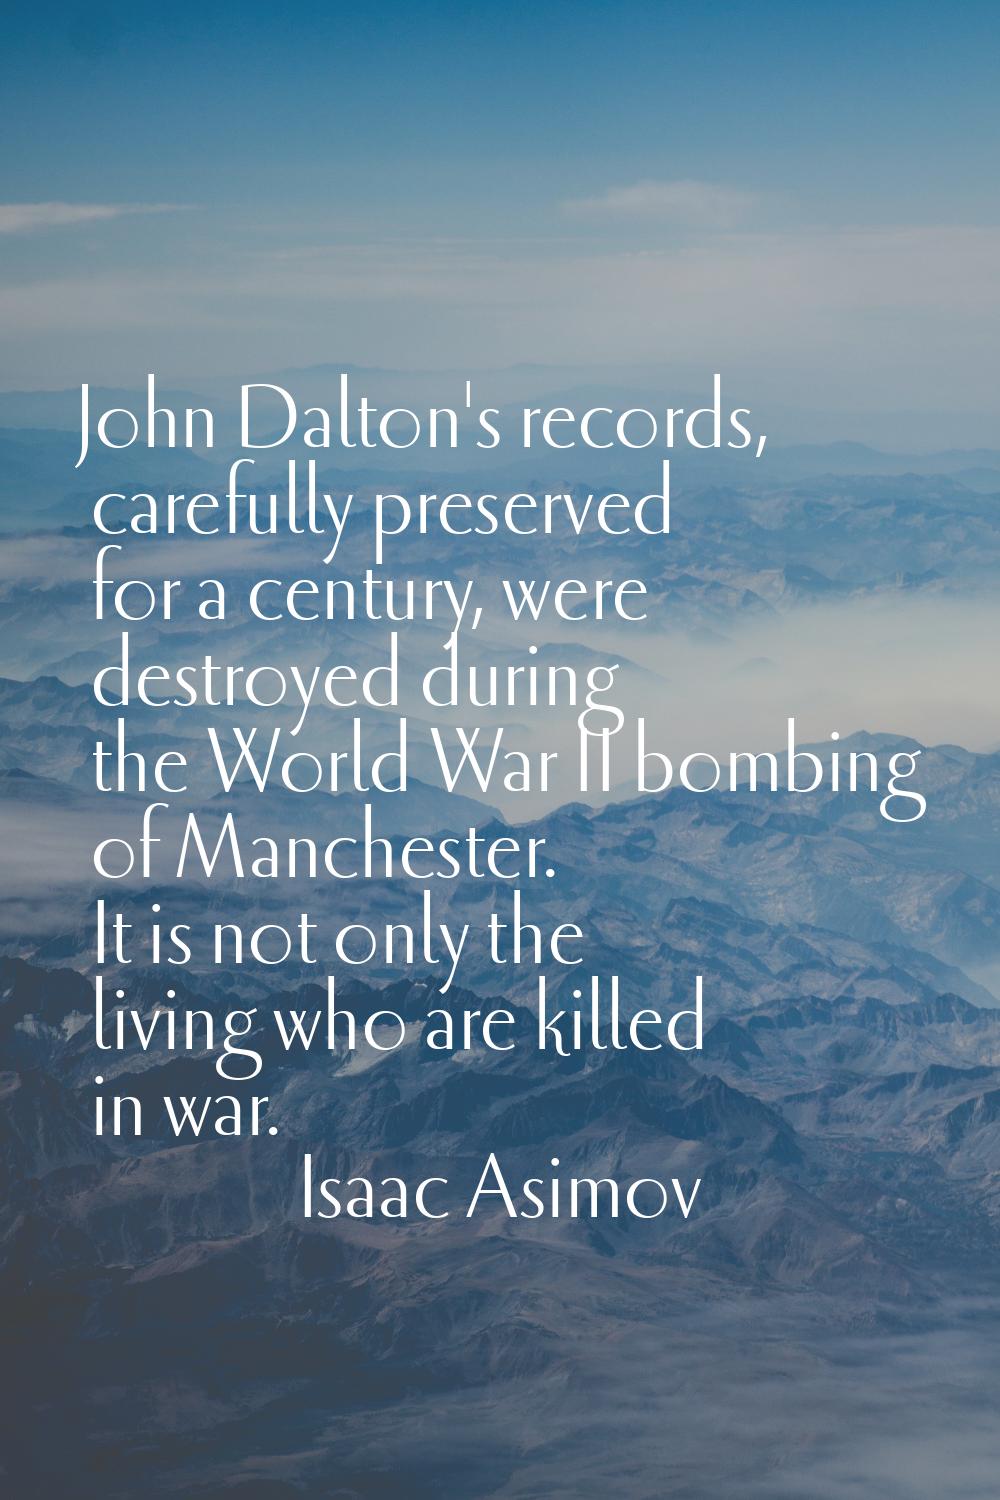 John Dalton's records, carefully preserved for a century, were destroyed during the World War II bo